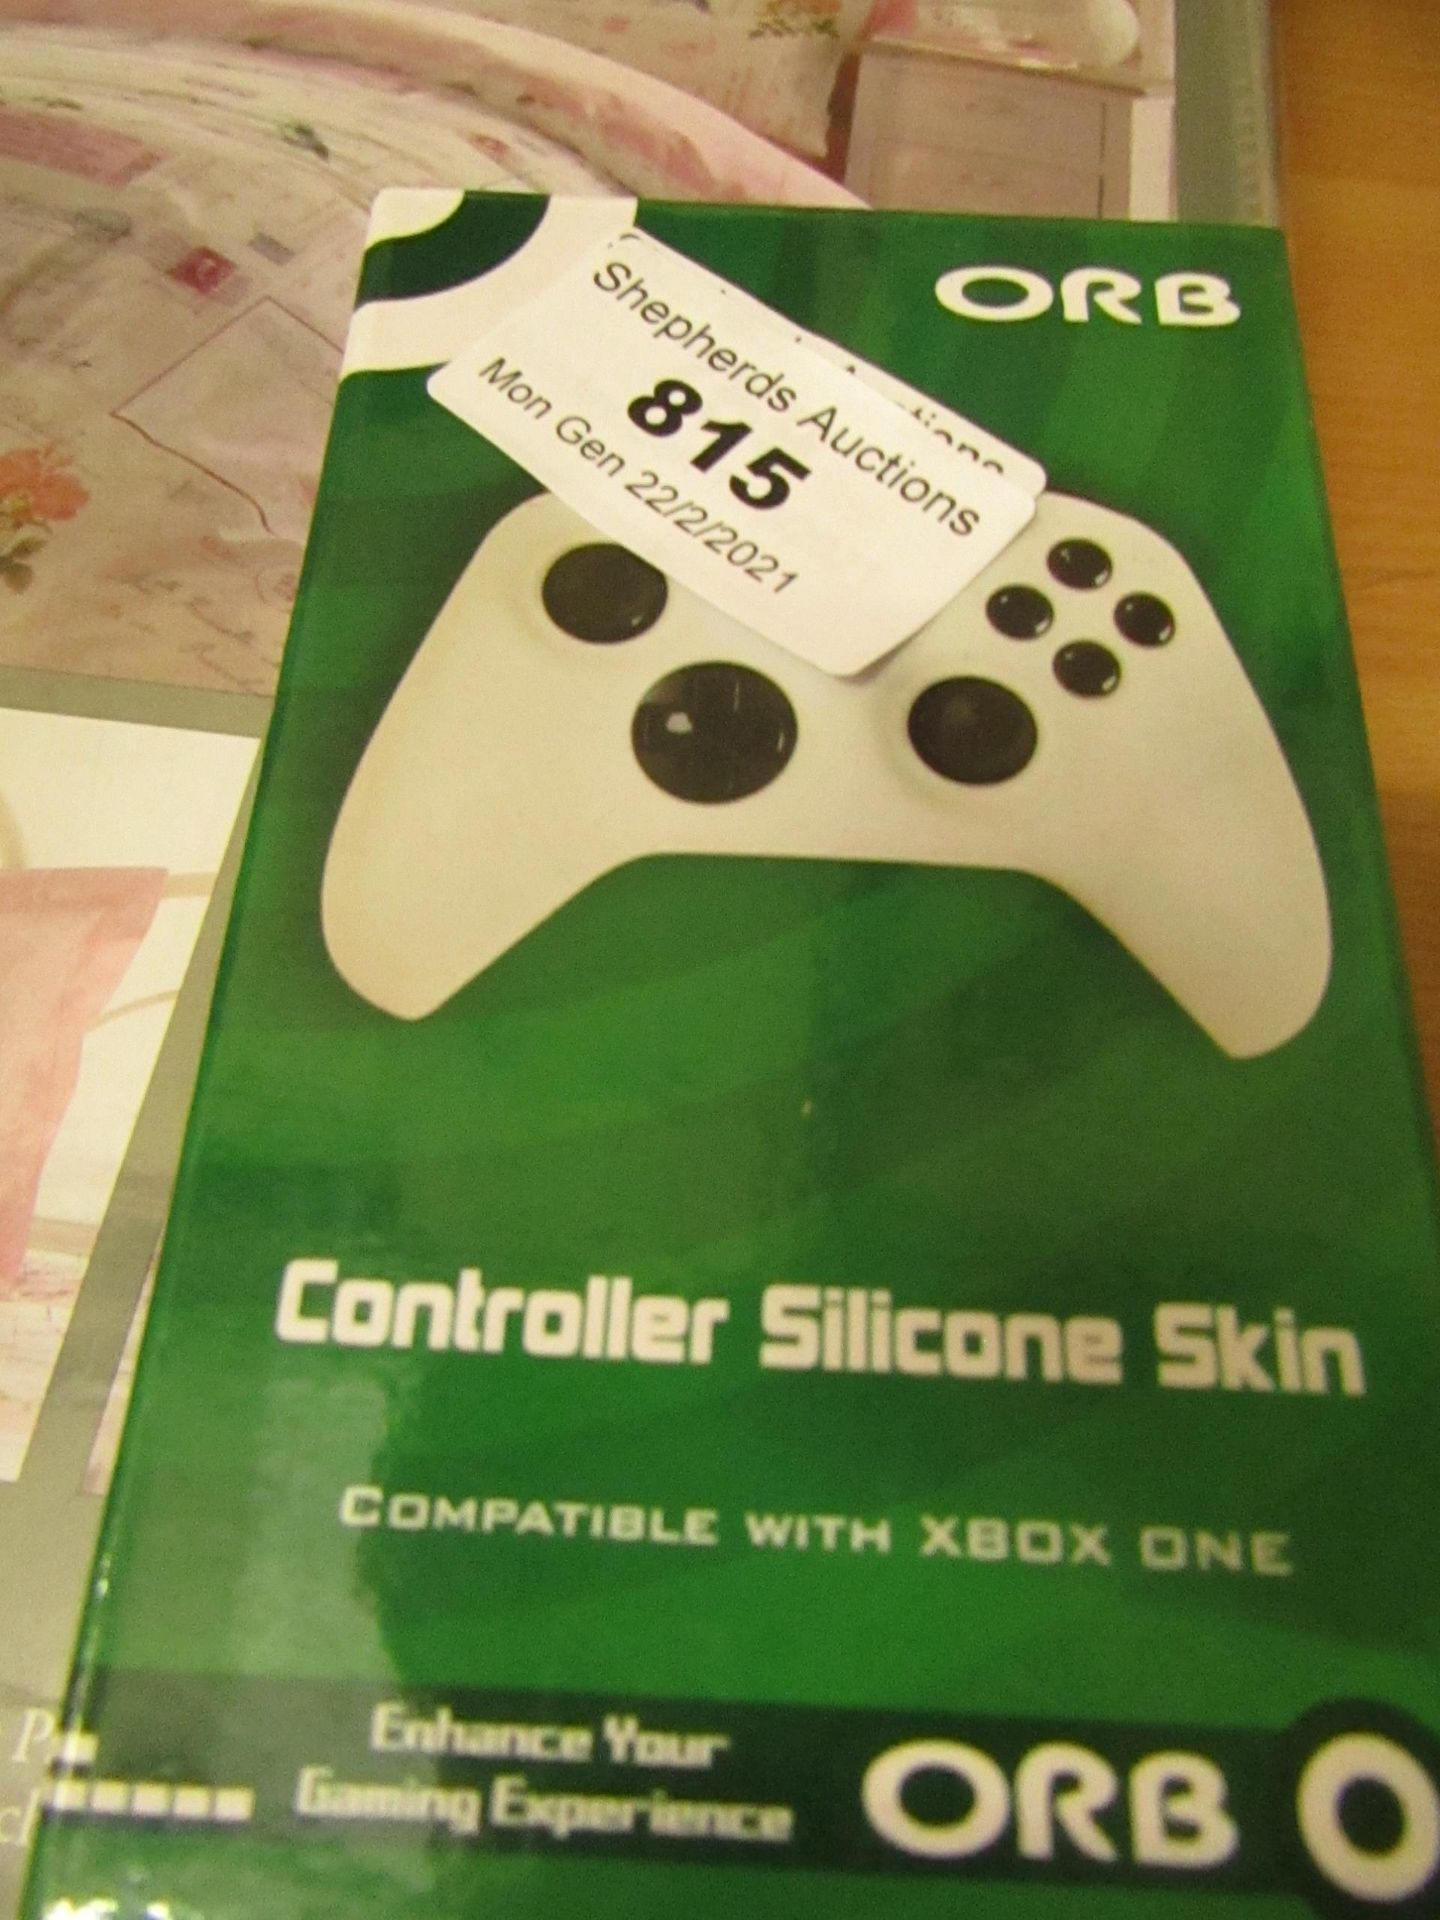 Orb - White Silicone Skin For Xbox One - New & Boxed